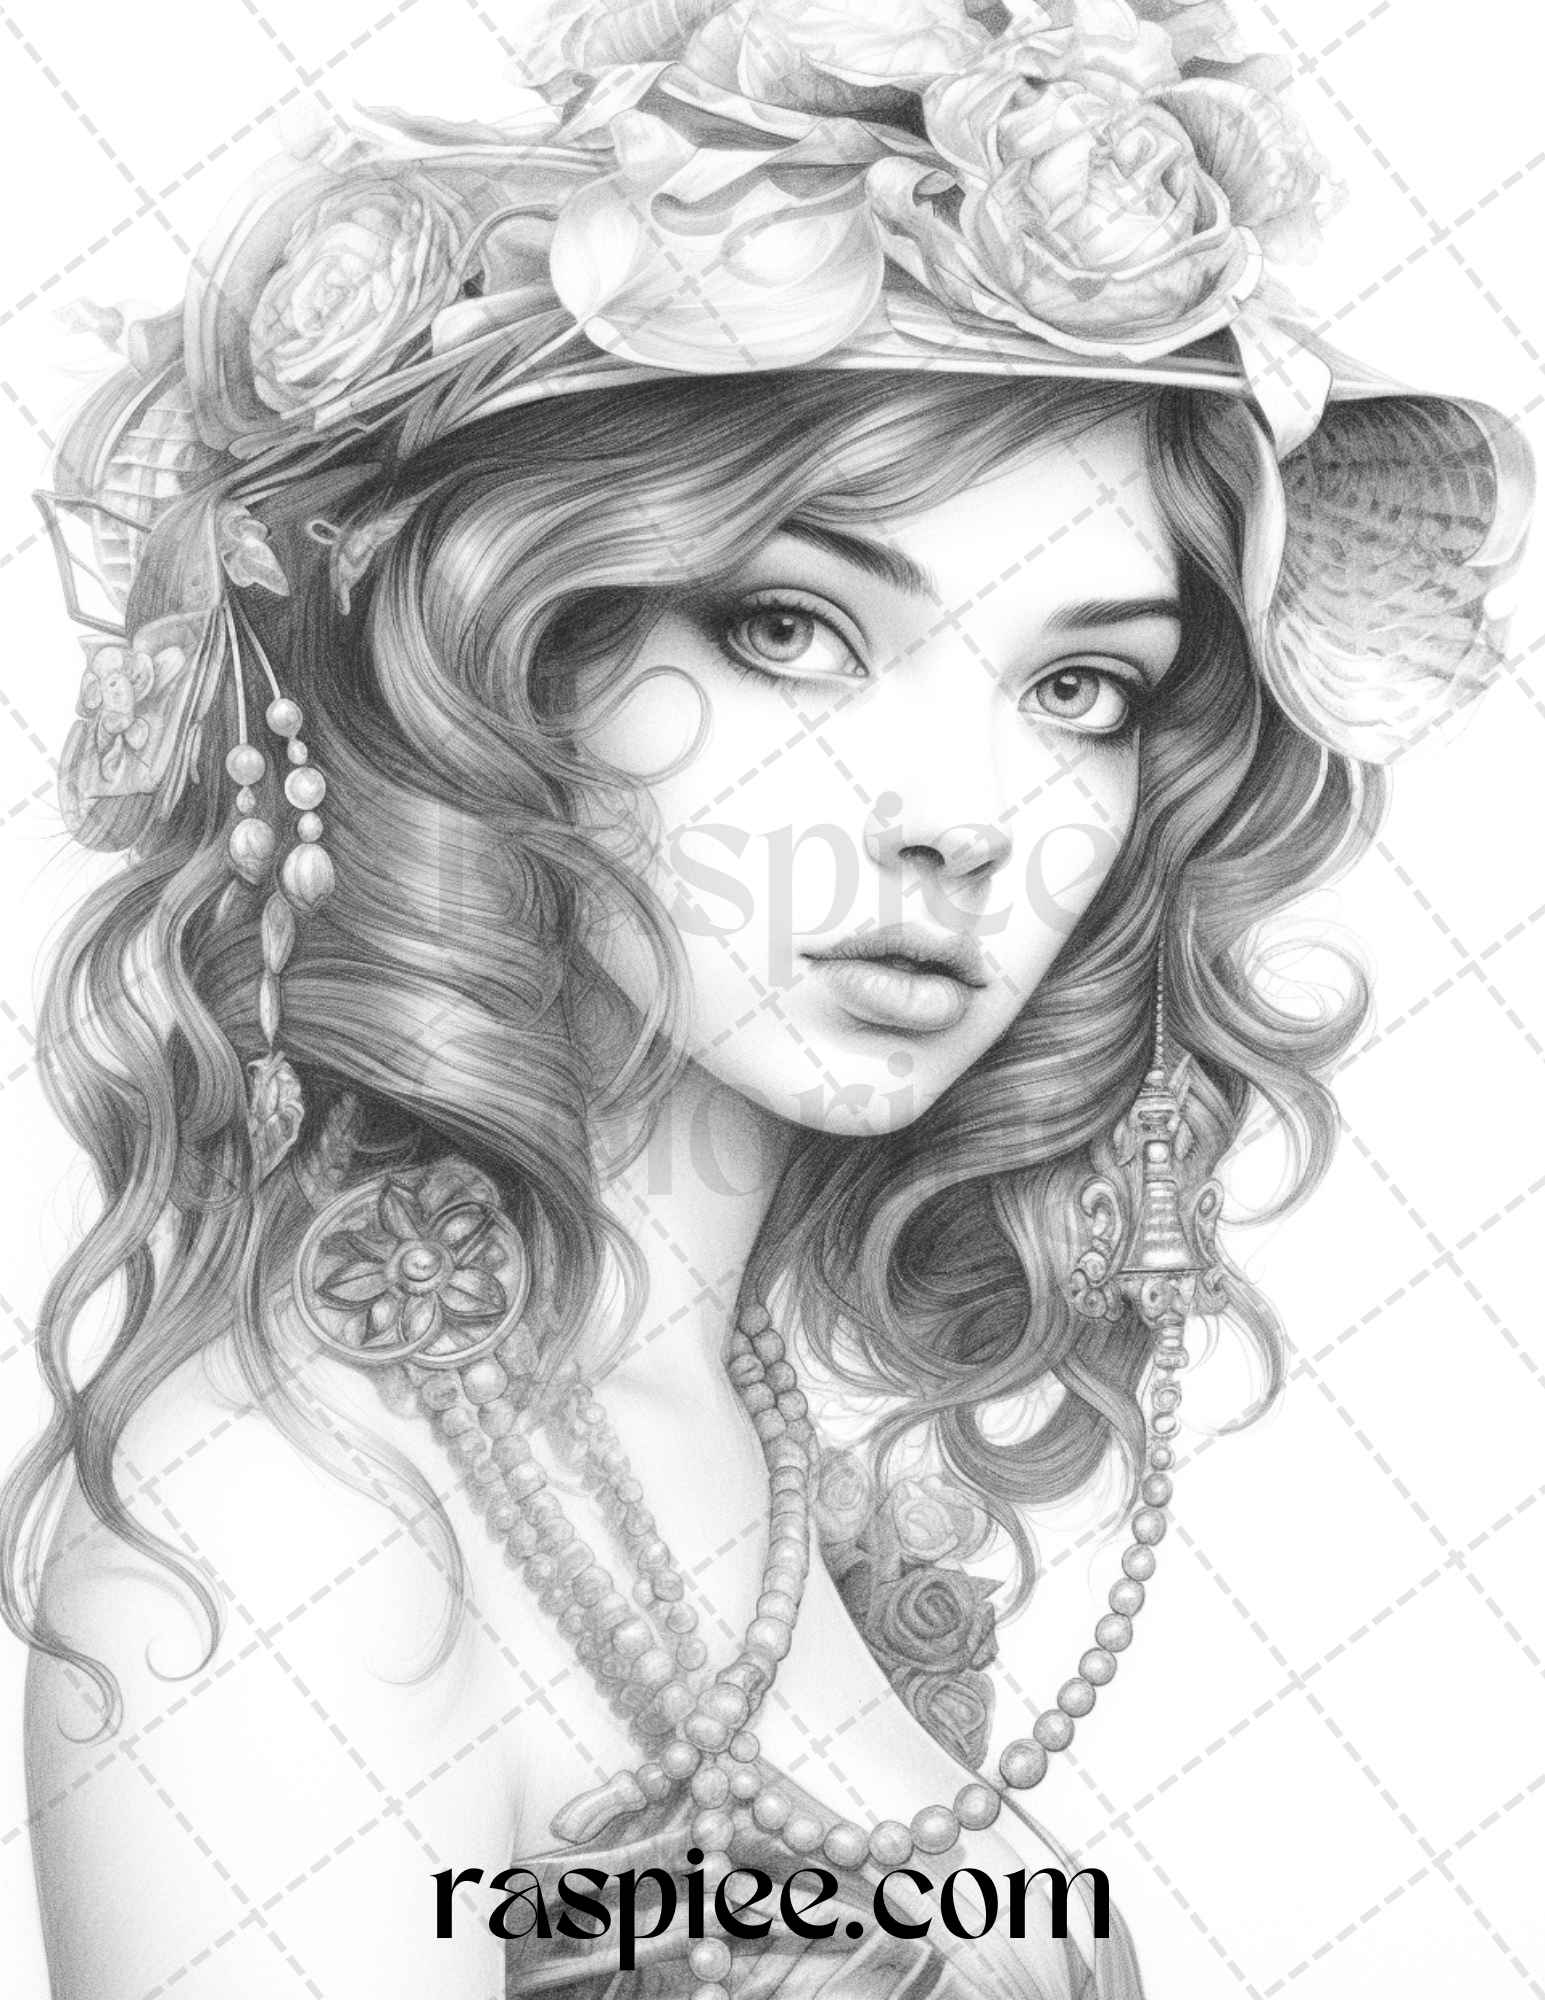 40 Beautiful Gatsby Girls Grayscale Coloring Pages Printable for Adults, PDF File Instant Download - raspiee